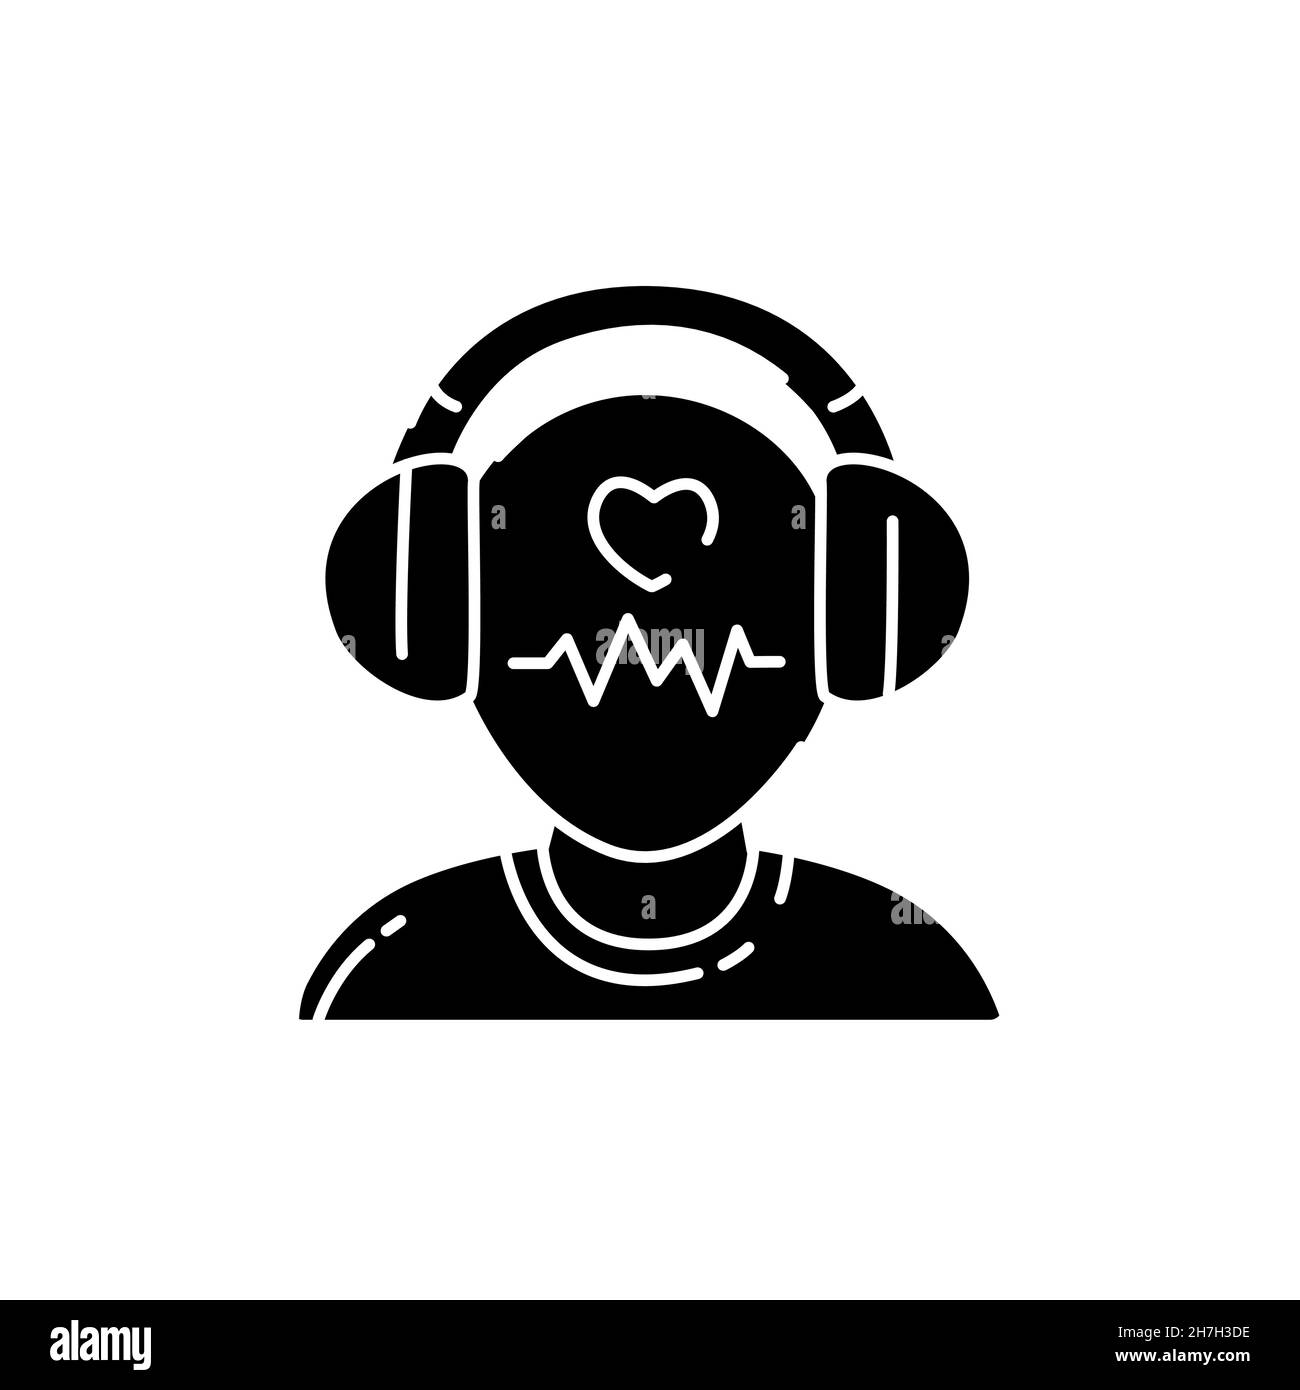 Listen music asmr color line icon. Asmr. Autonomous sensory meridian response, sound waves as a symbol of enjoying sounds, whisper and music. Sign for Stock Vector